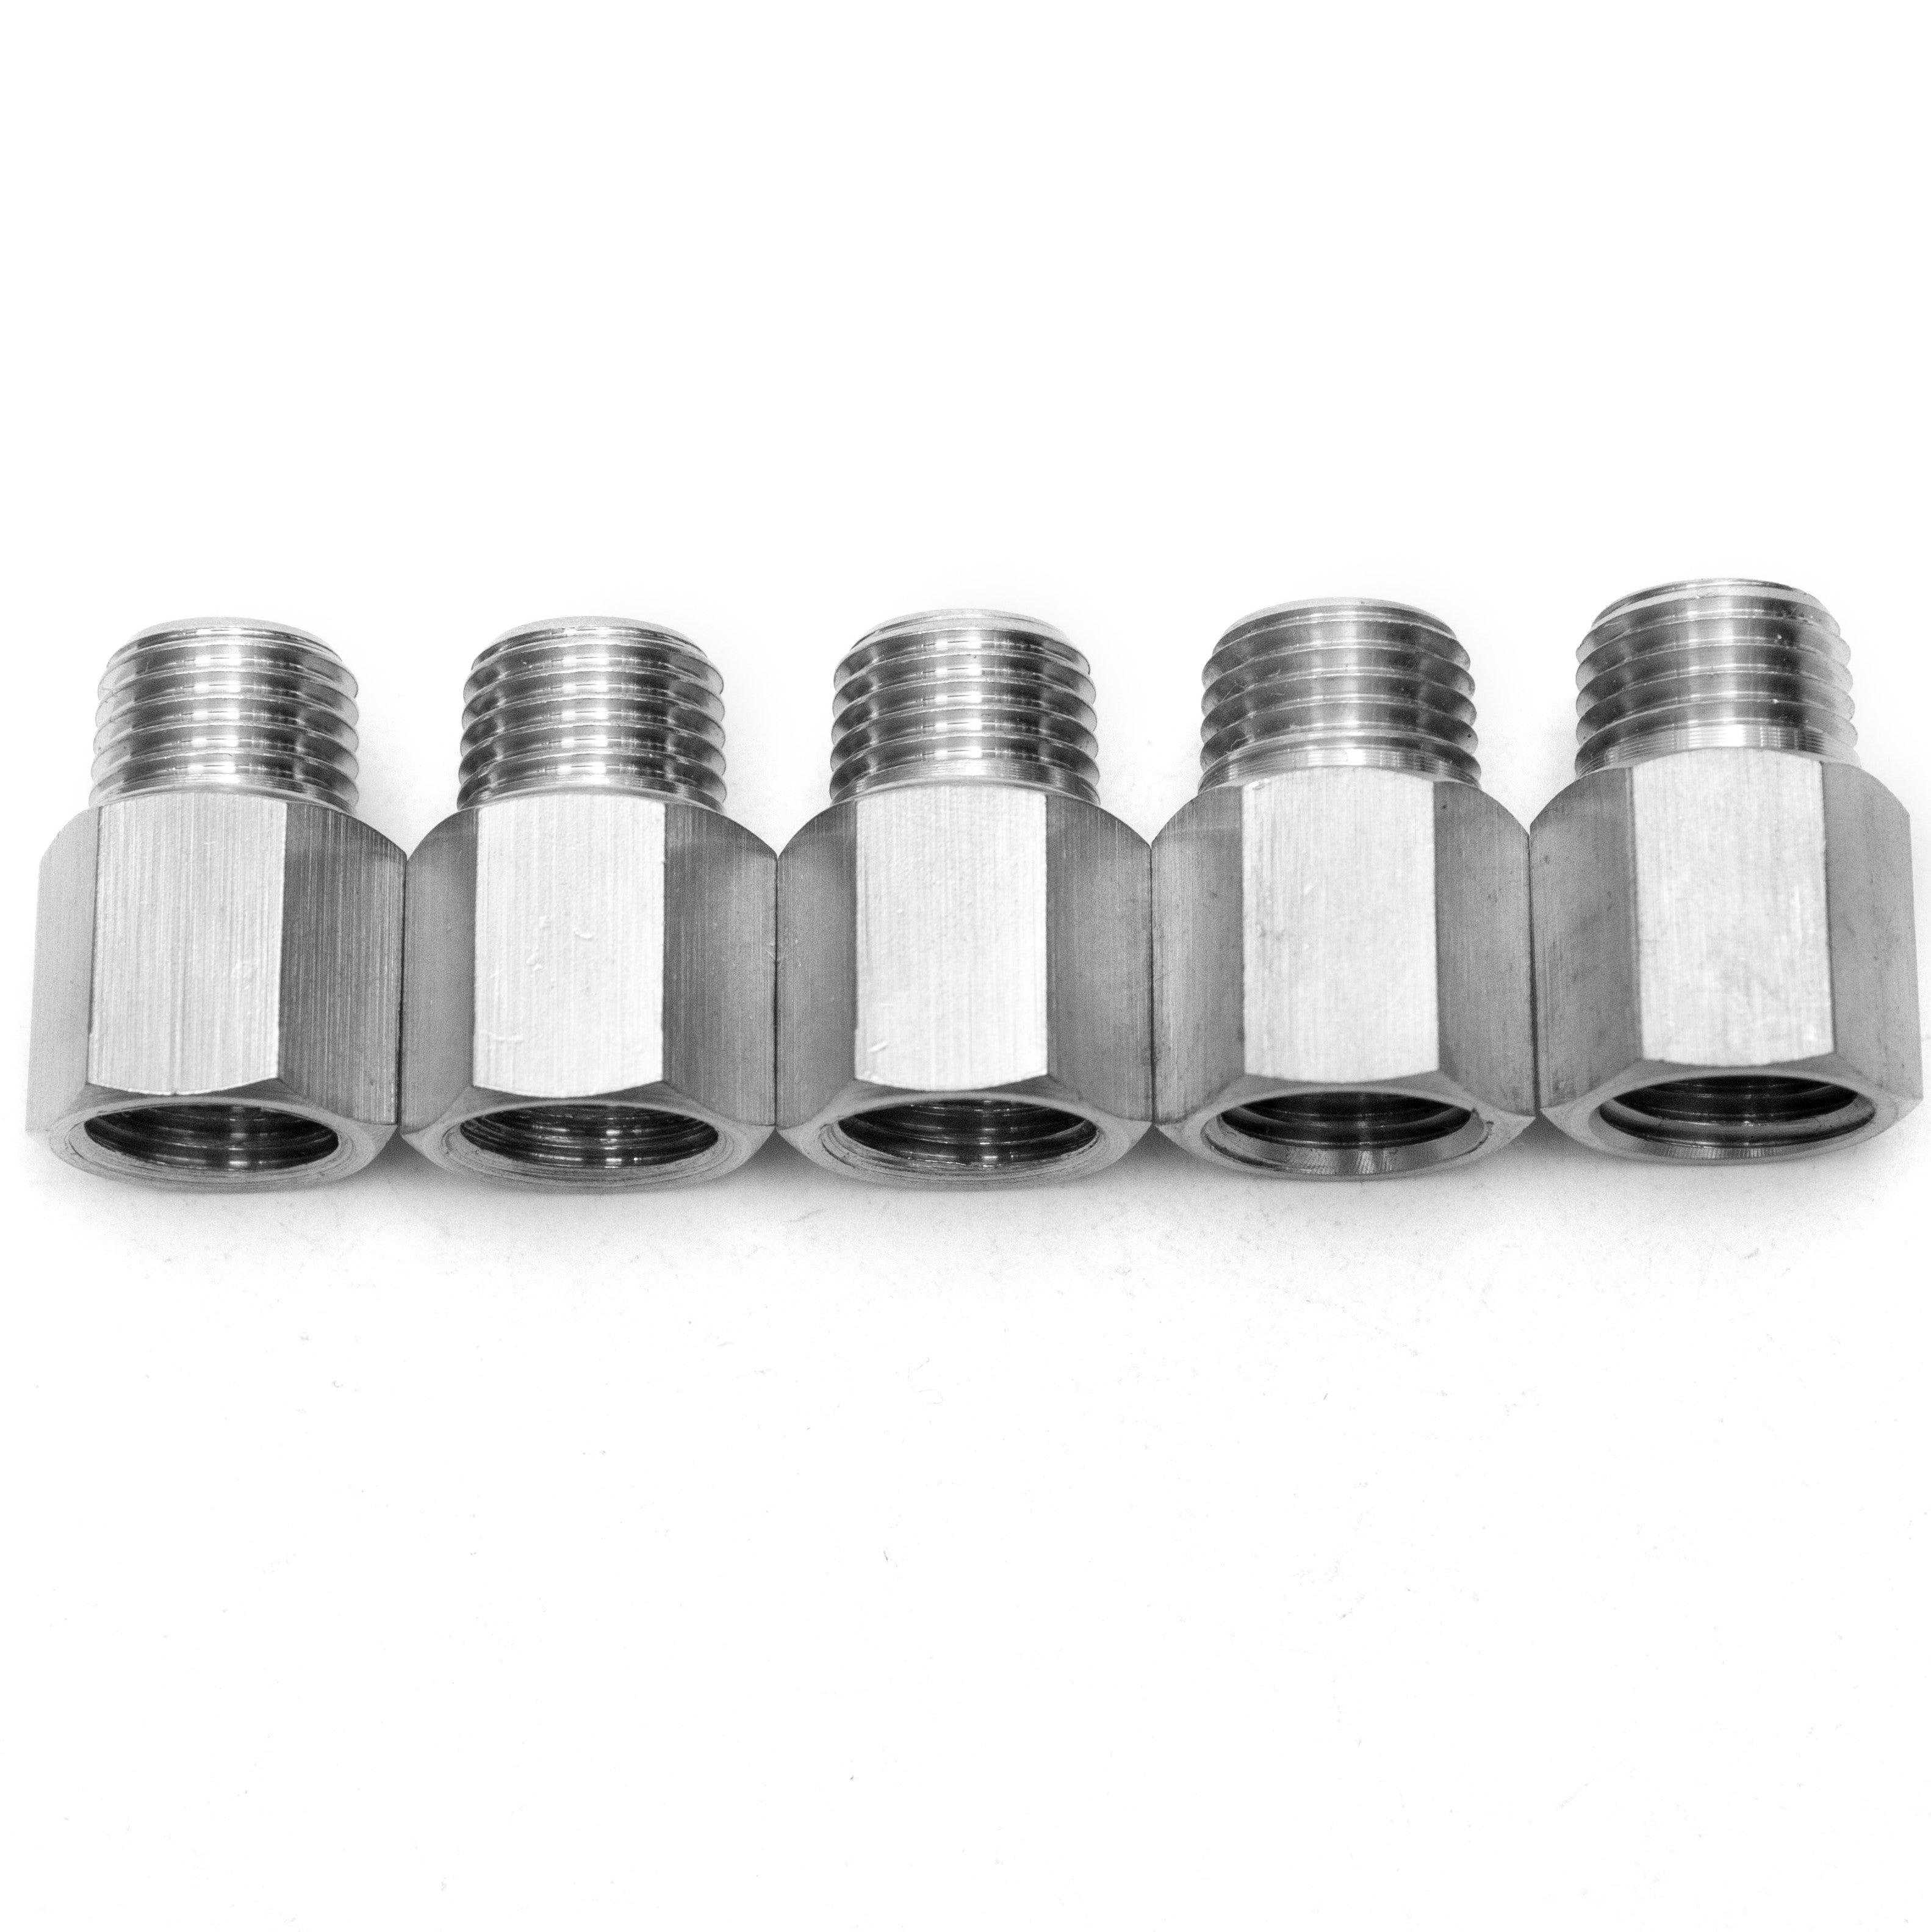 LTWFITTING Bar Production Stainless Steel 316 Pipe Fitting 1/4 Inch Female x 1/4 Inch Male NPT Adapter Air Fuel Water (Pack of 5)